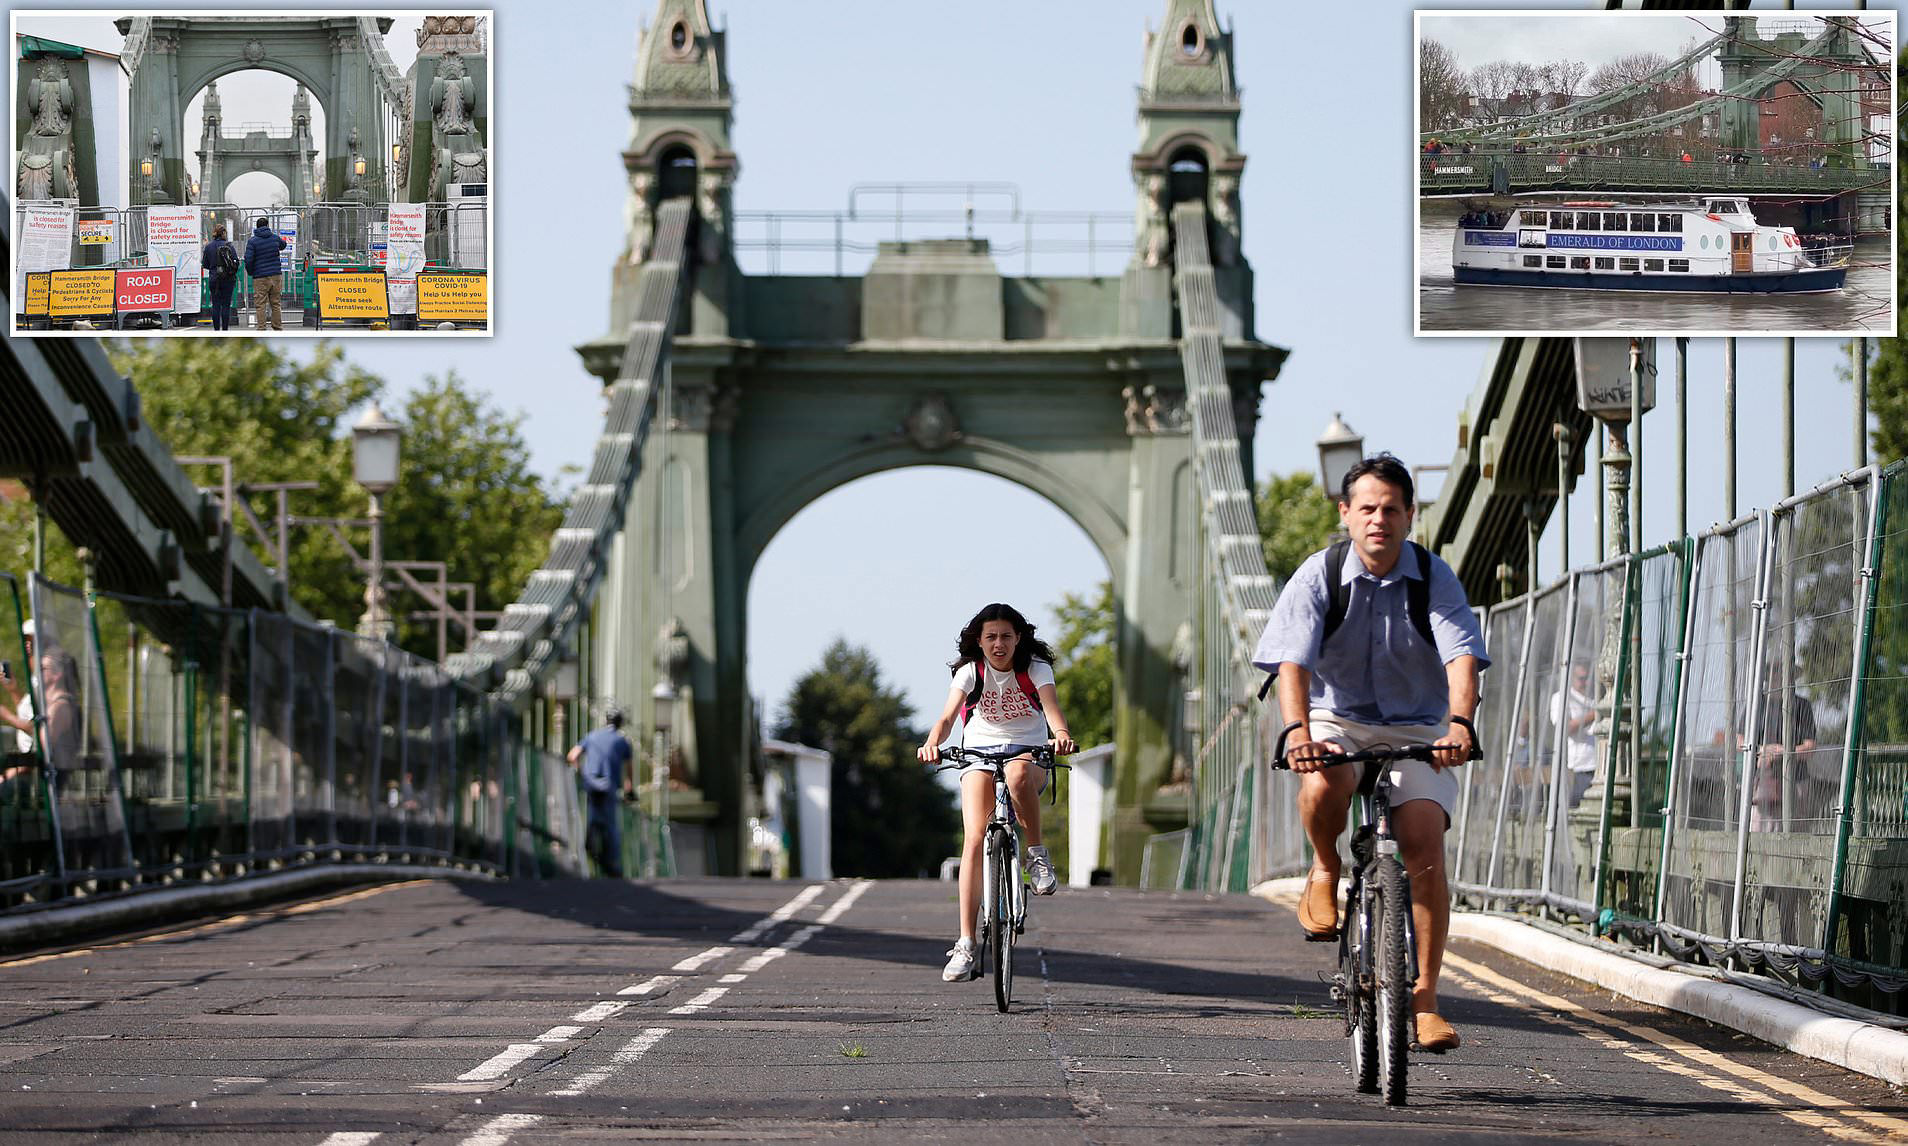 Hammersmith Bridge finally reopens - but only to cyclists as drivers ...